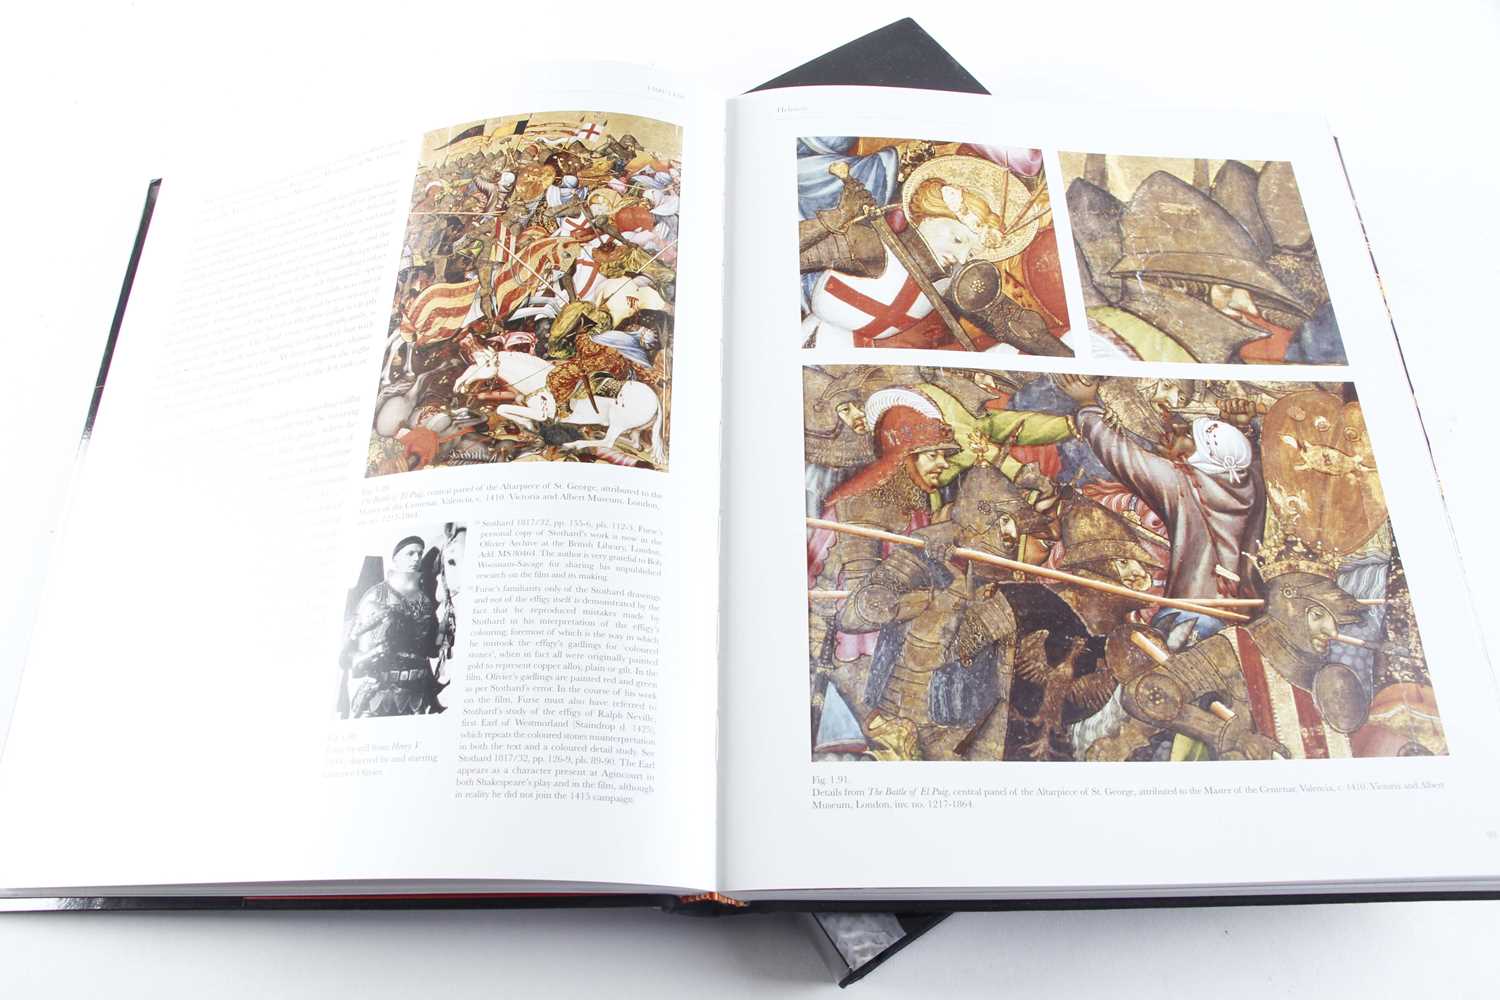 2 Vols: Armour of the English Knight 1400-1450 and 1450-1500 by Tobias Capwell - Image 2 of 4